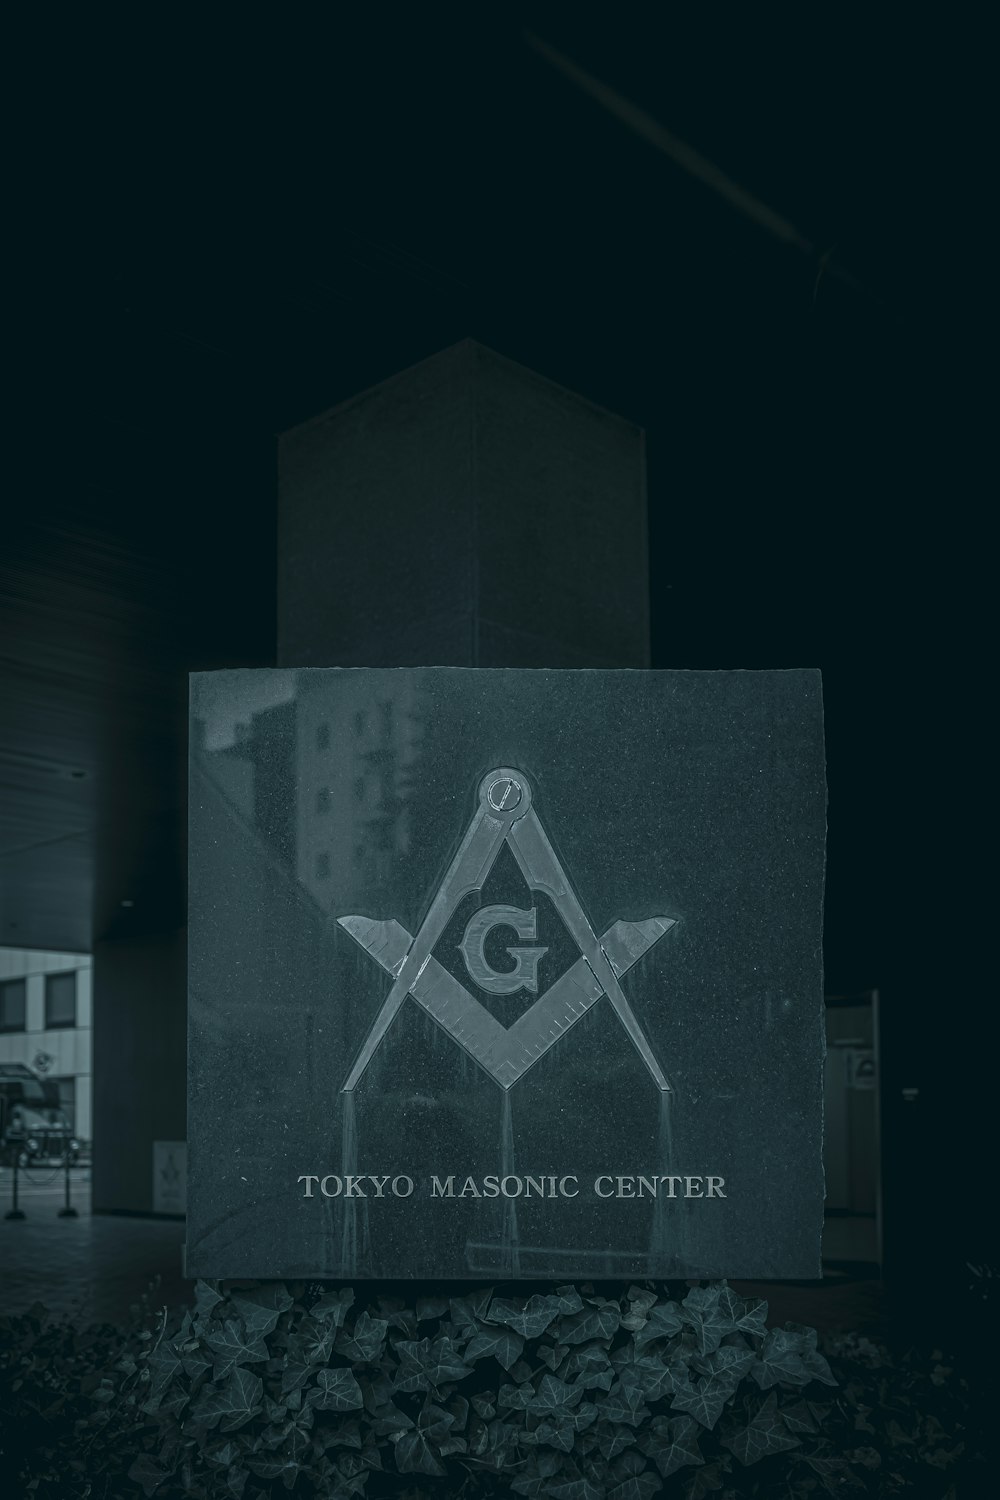 a black and white photo of a building with a sign that says tokyo masonic center